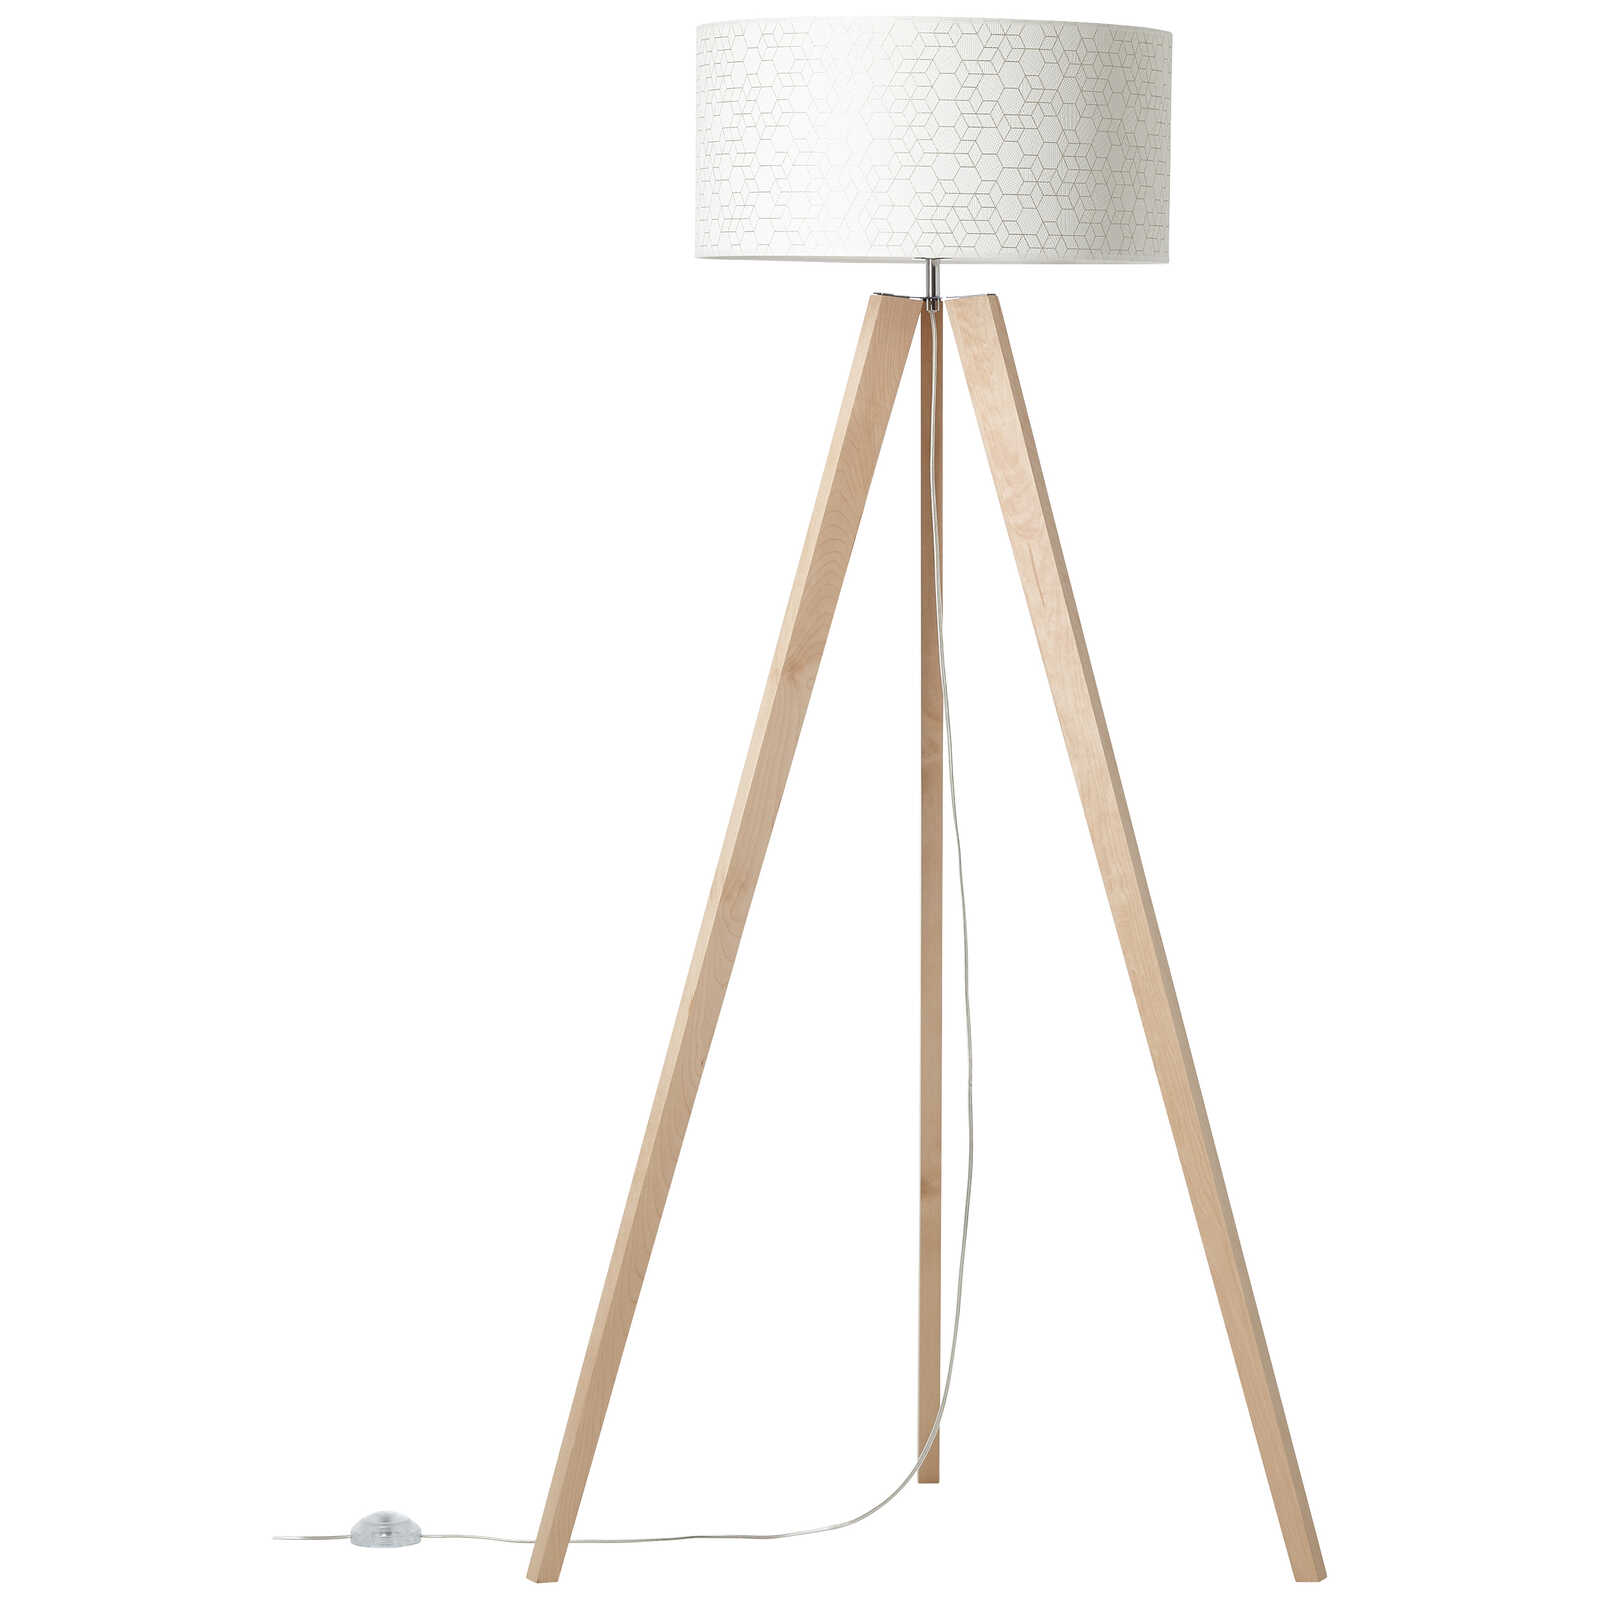             Floor lamp made of textile - Hannes 11 - Brown
        